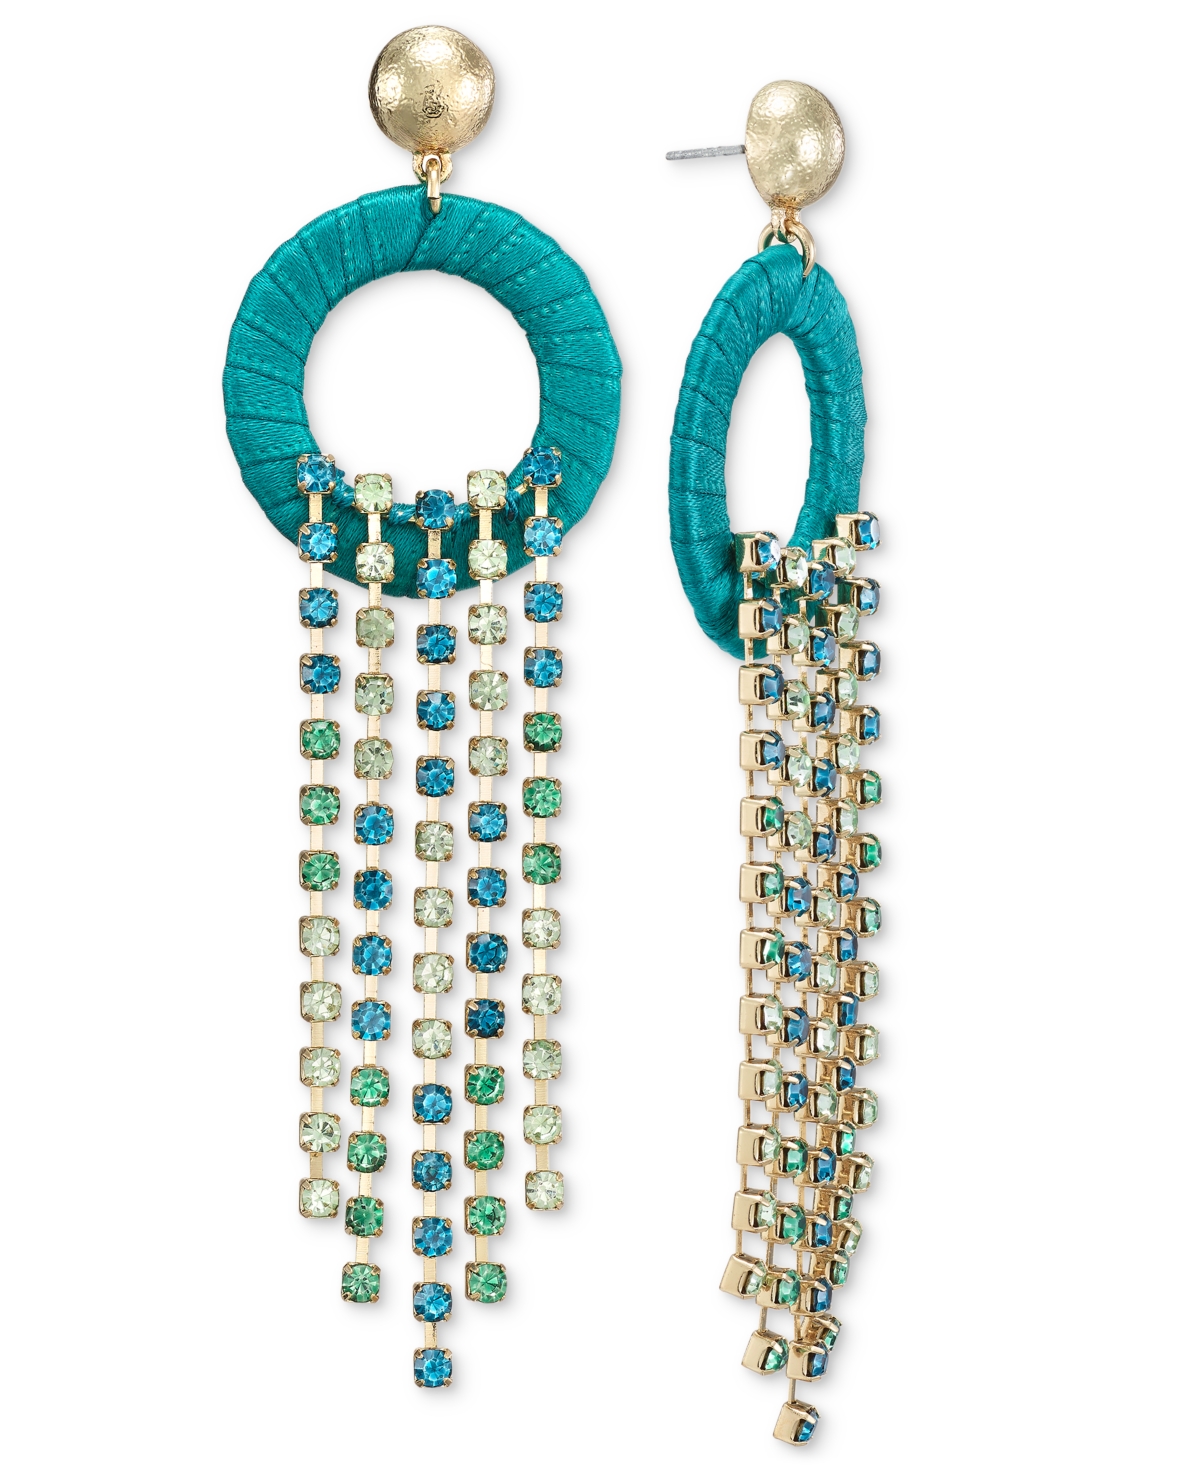 Gold-Tone Color Crystal Fringe & Ribbon-Wrapped Circle Statement Earrings, Created for Macy's - Green